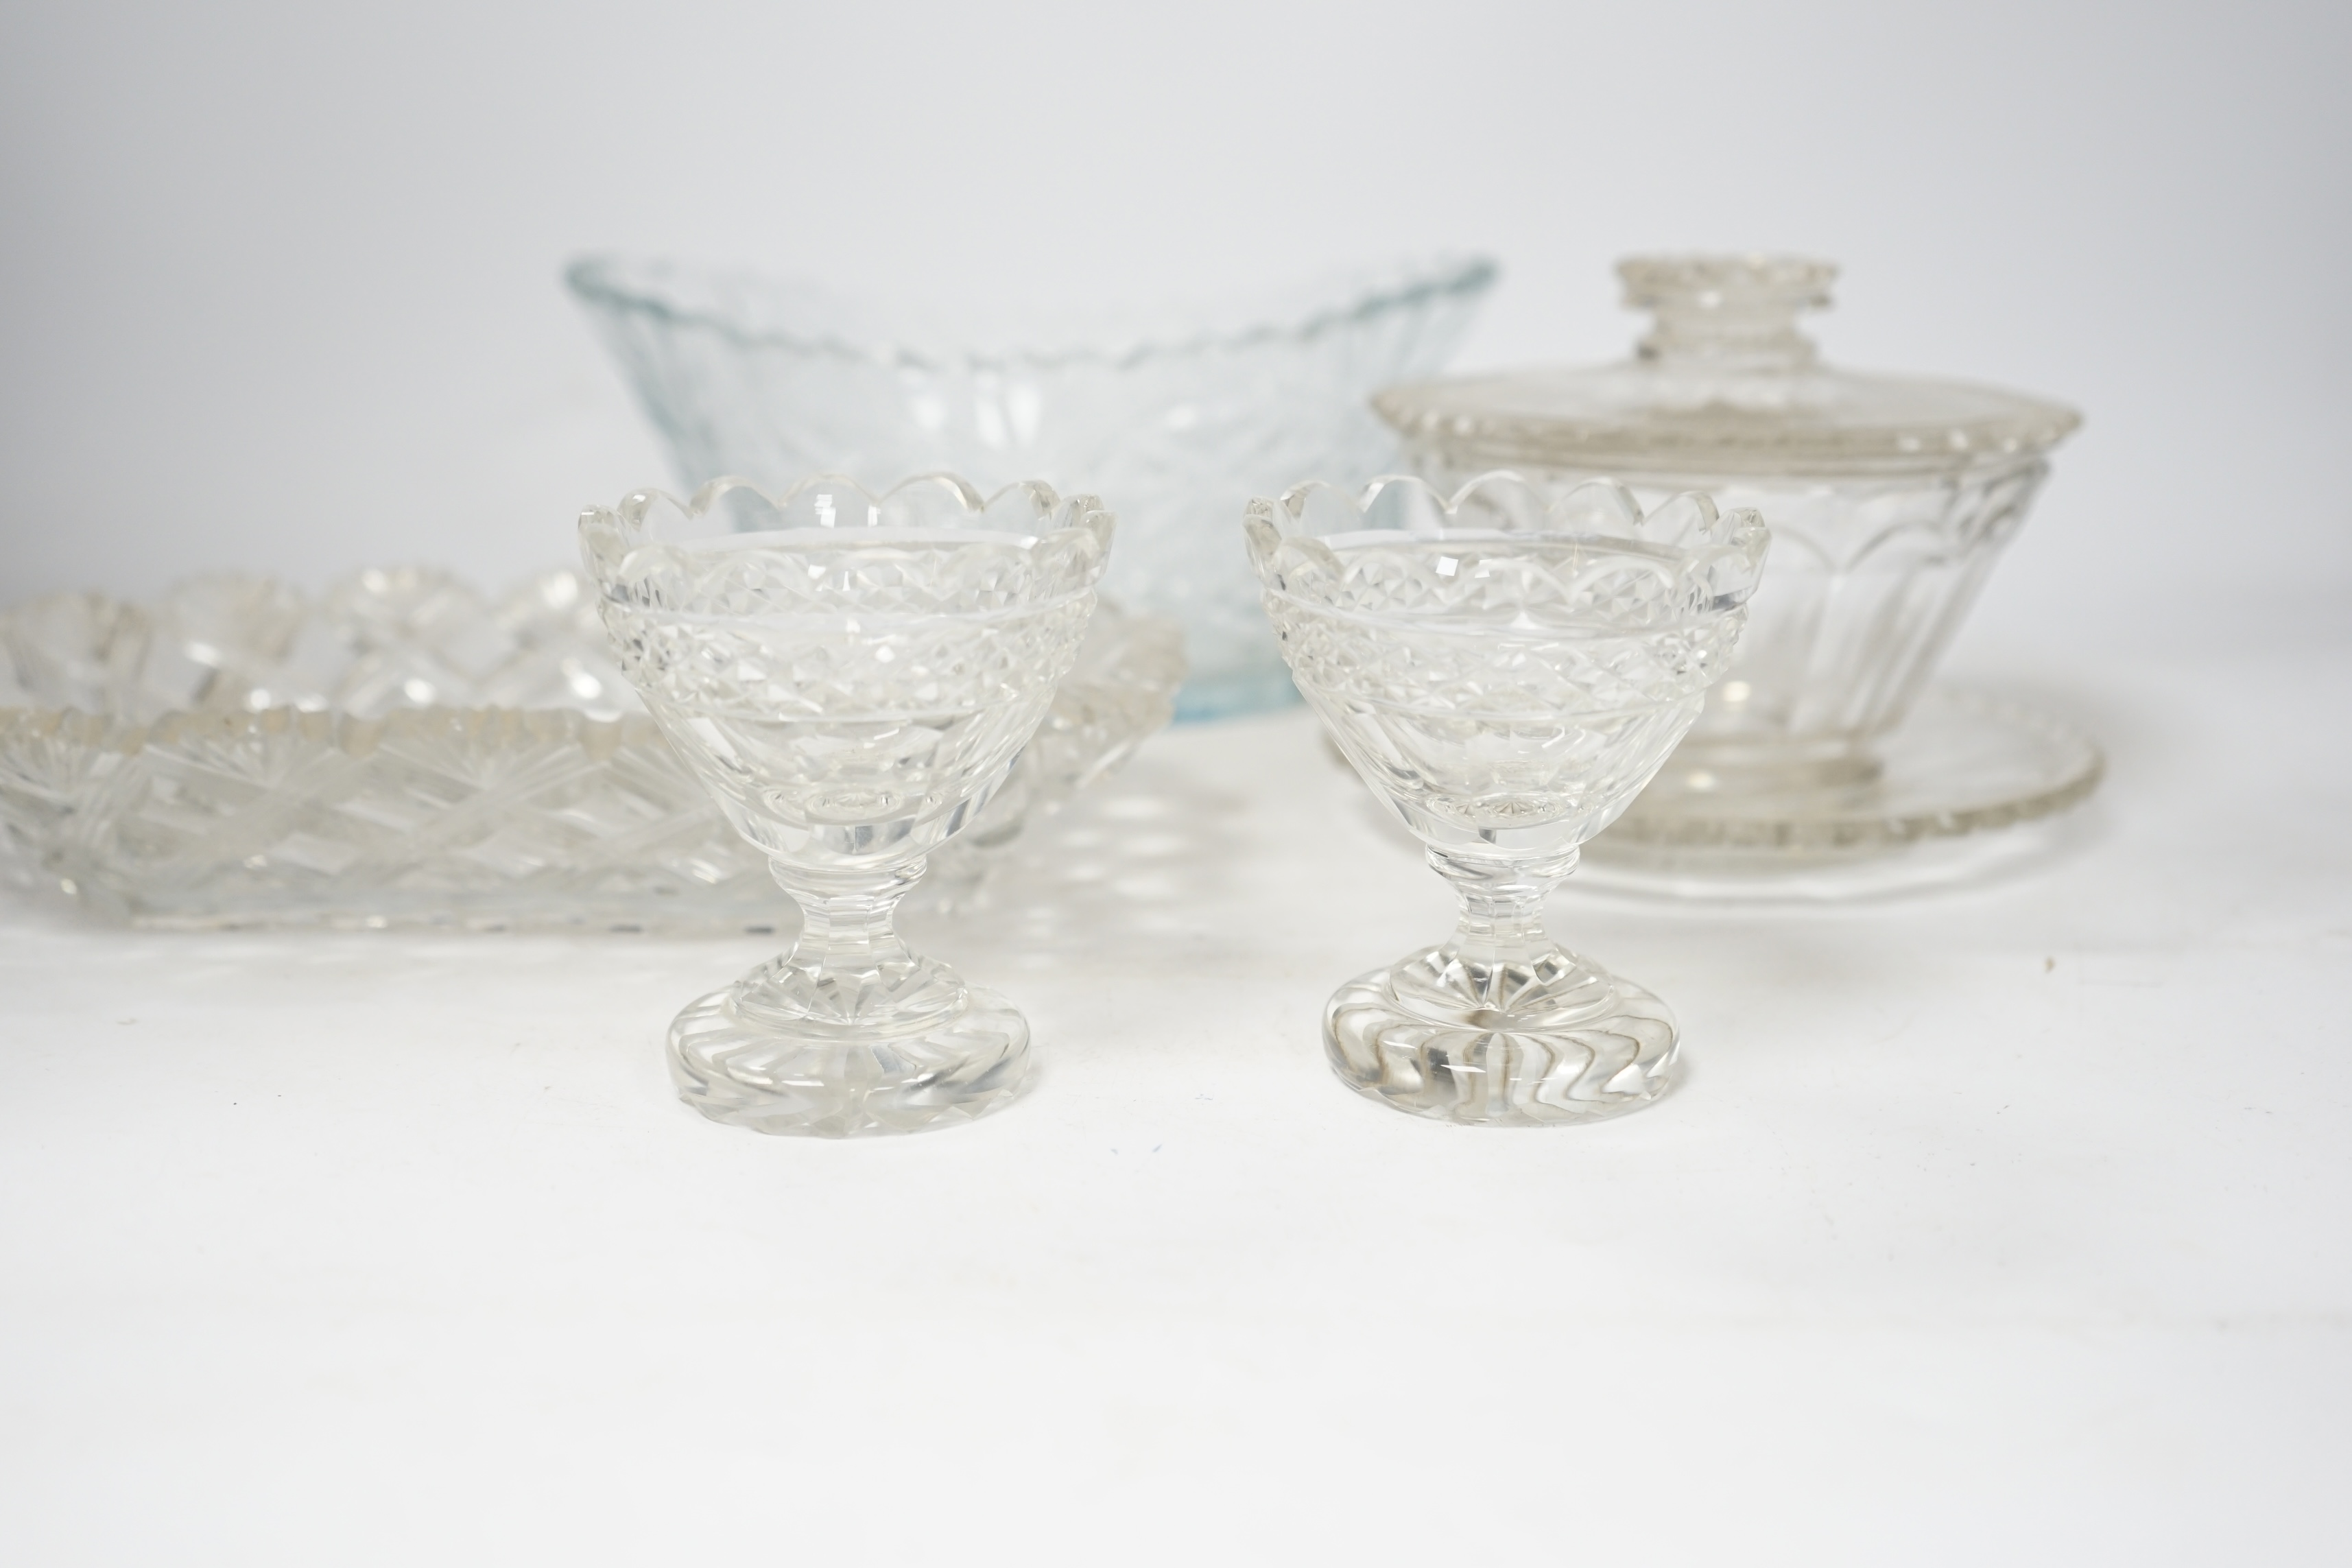 Six pieces of 19th century cut glass including a bon bon dish and a pair of glasses, largest 23cm. Condition - poor to fair, some chips